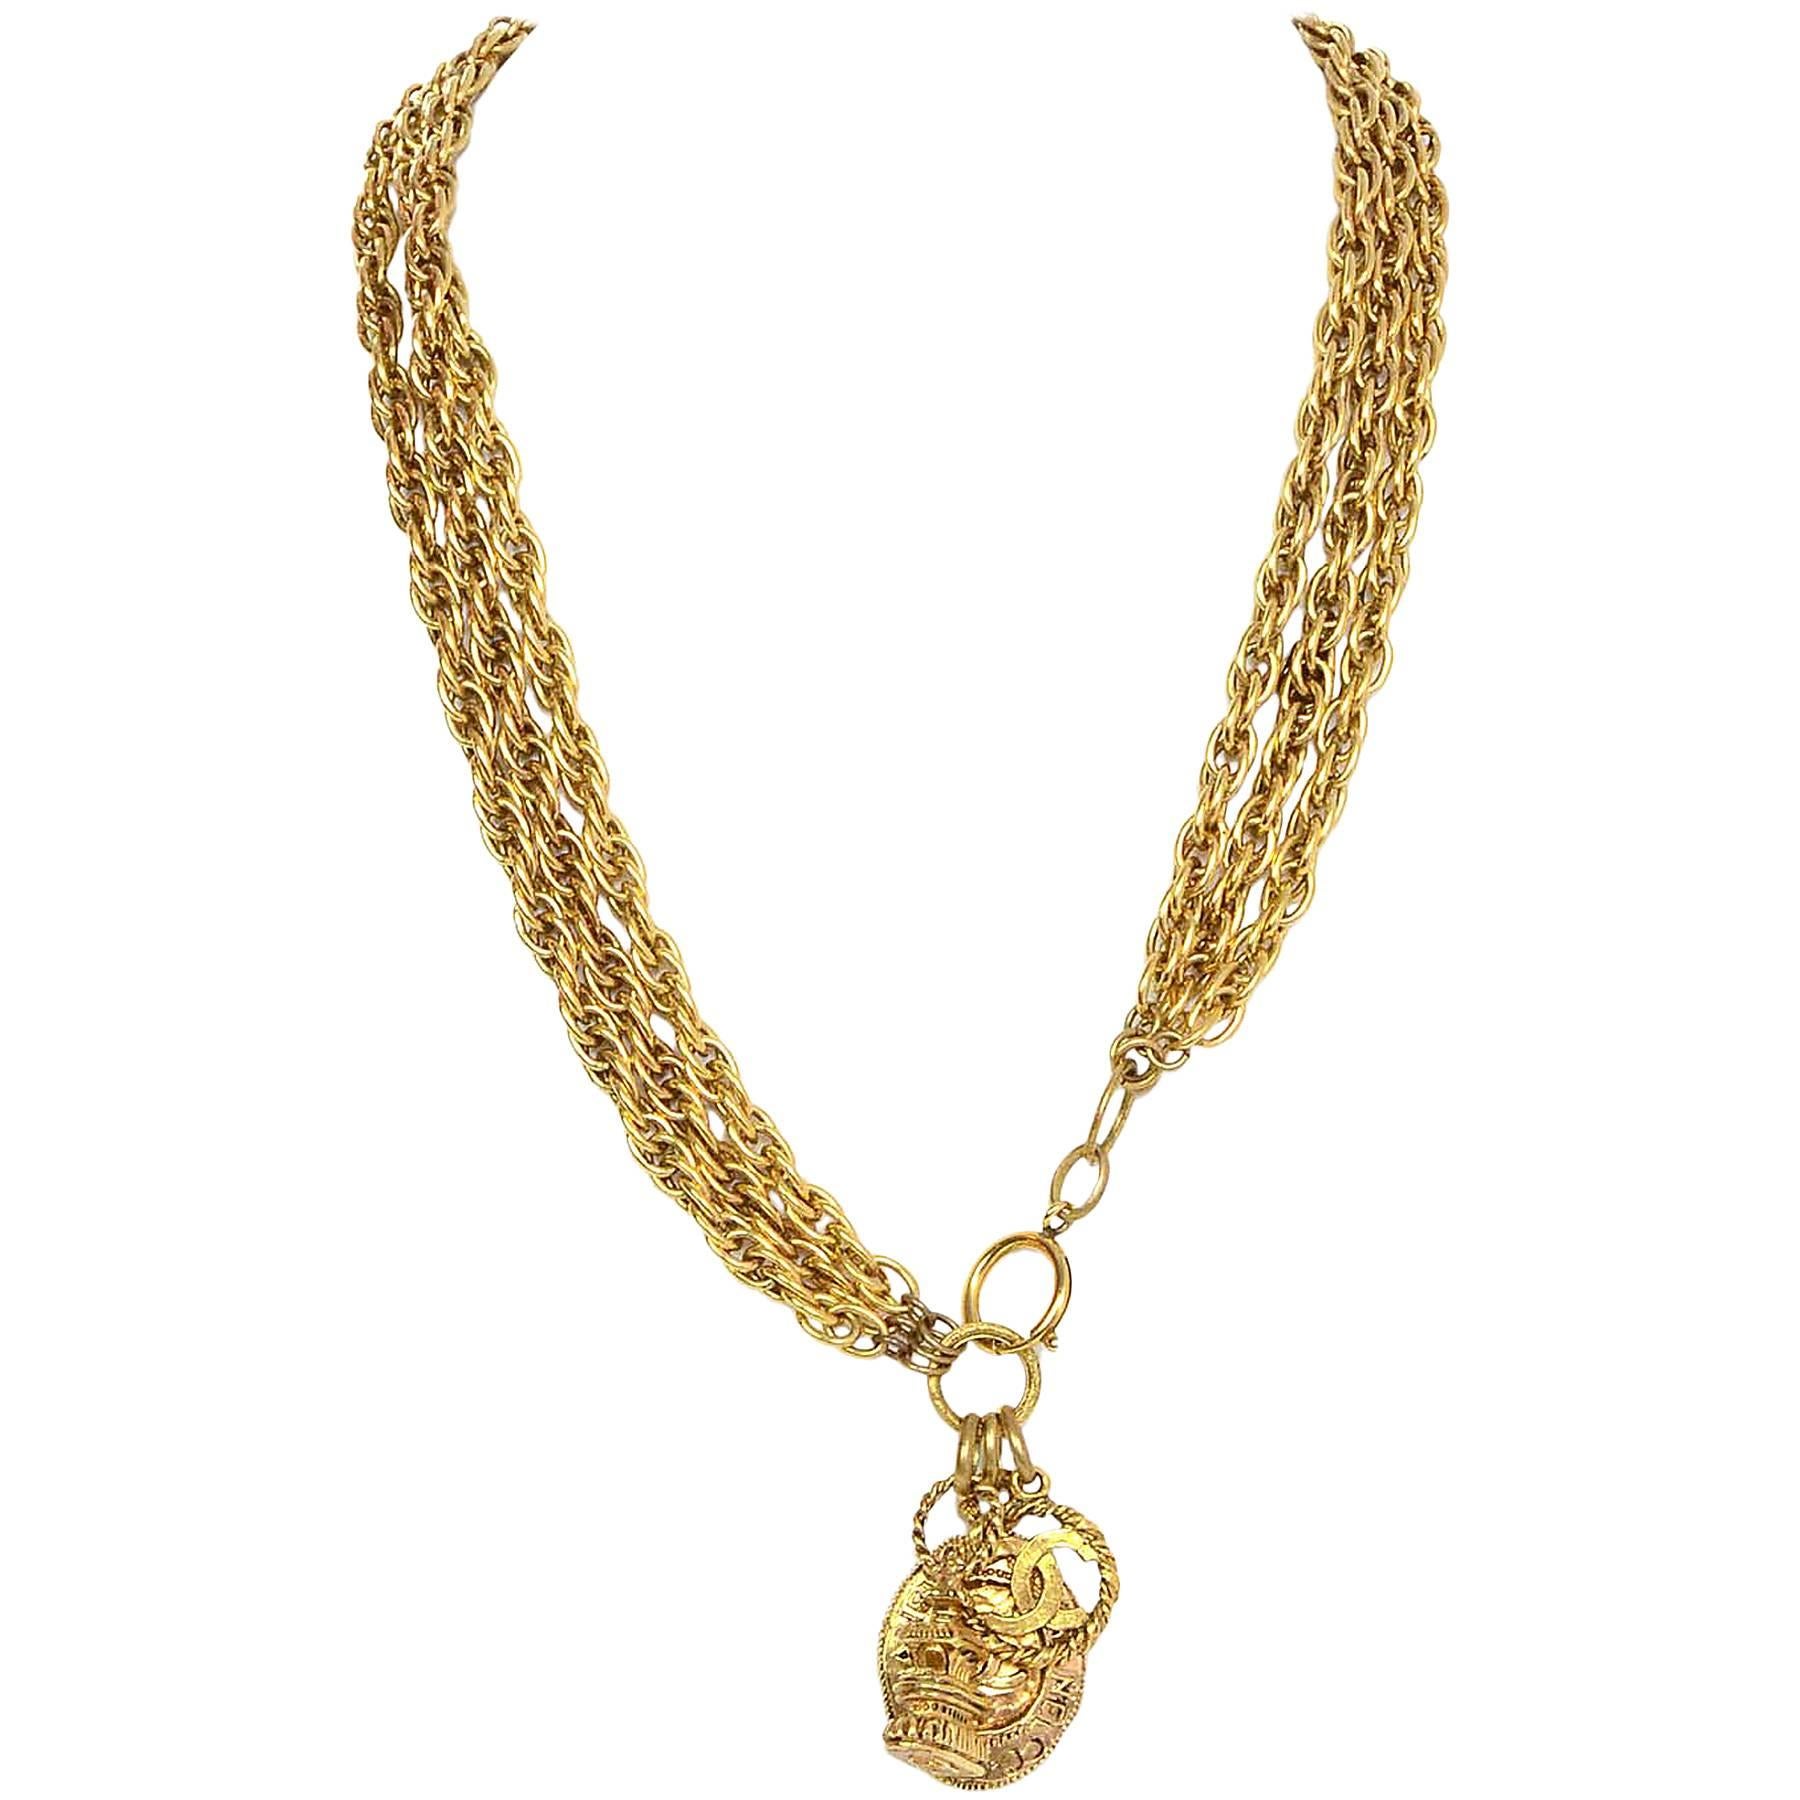 Chanel Gold-Tone Multi-Strand Belt/Necklace

Features three different charms, can be worn as belt or necklace

Made In: France
Year of Production: 1970s-1980s
Color: Goldtone
Materials: Metal
Closure: Jumpring closure
Stamp: Chanel CC made in